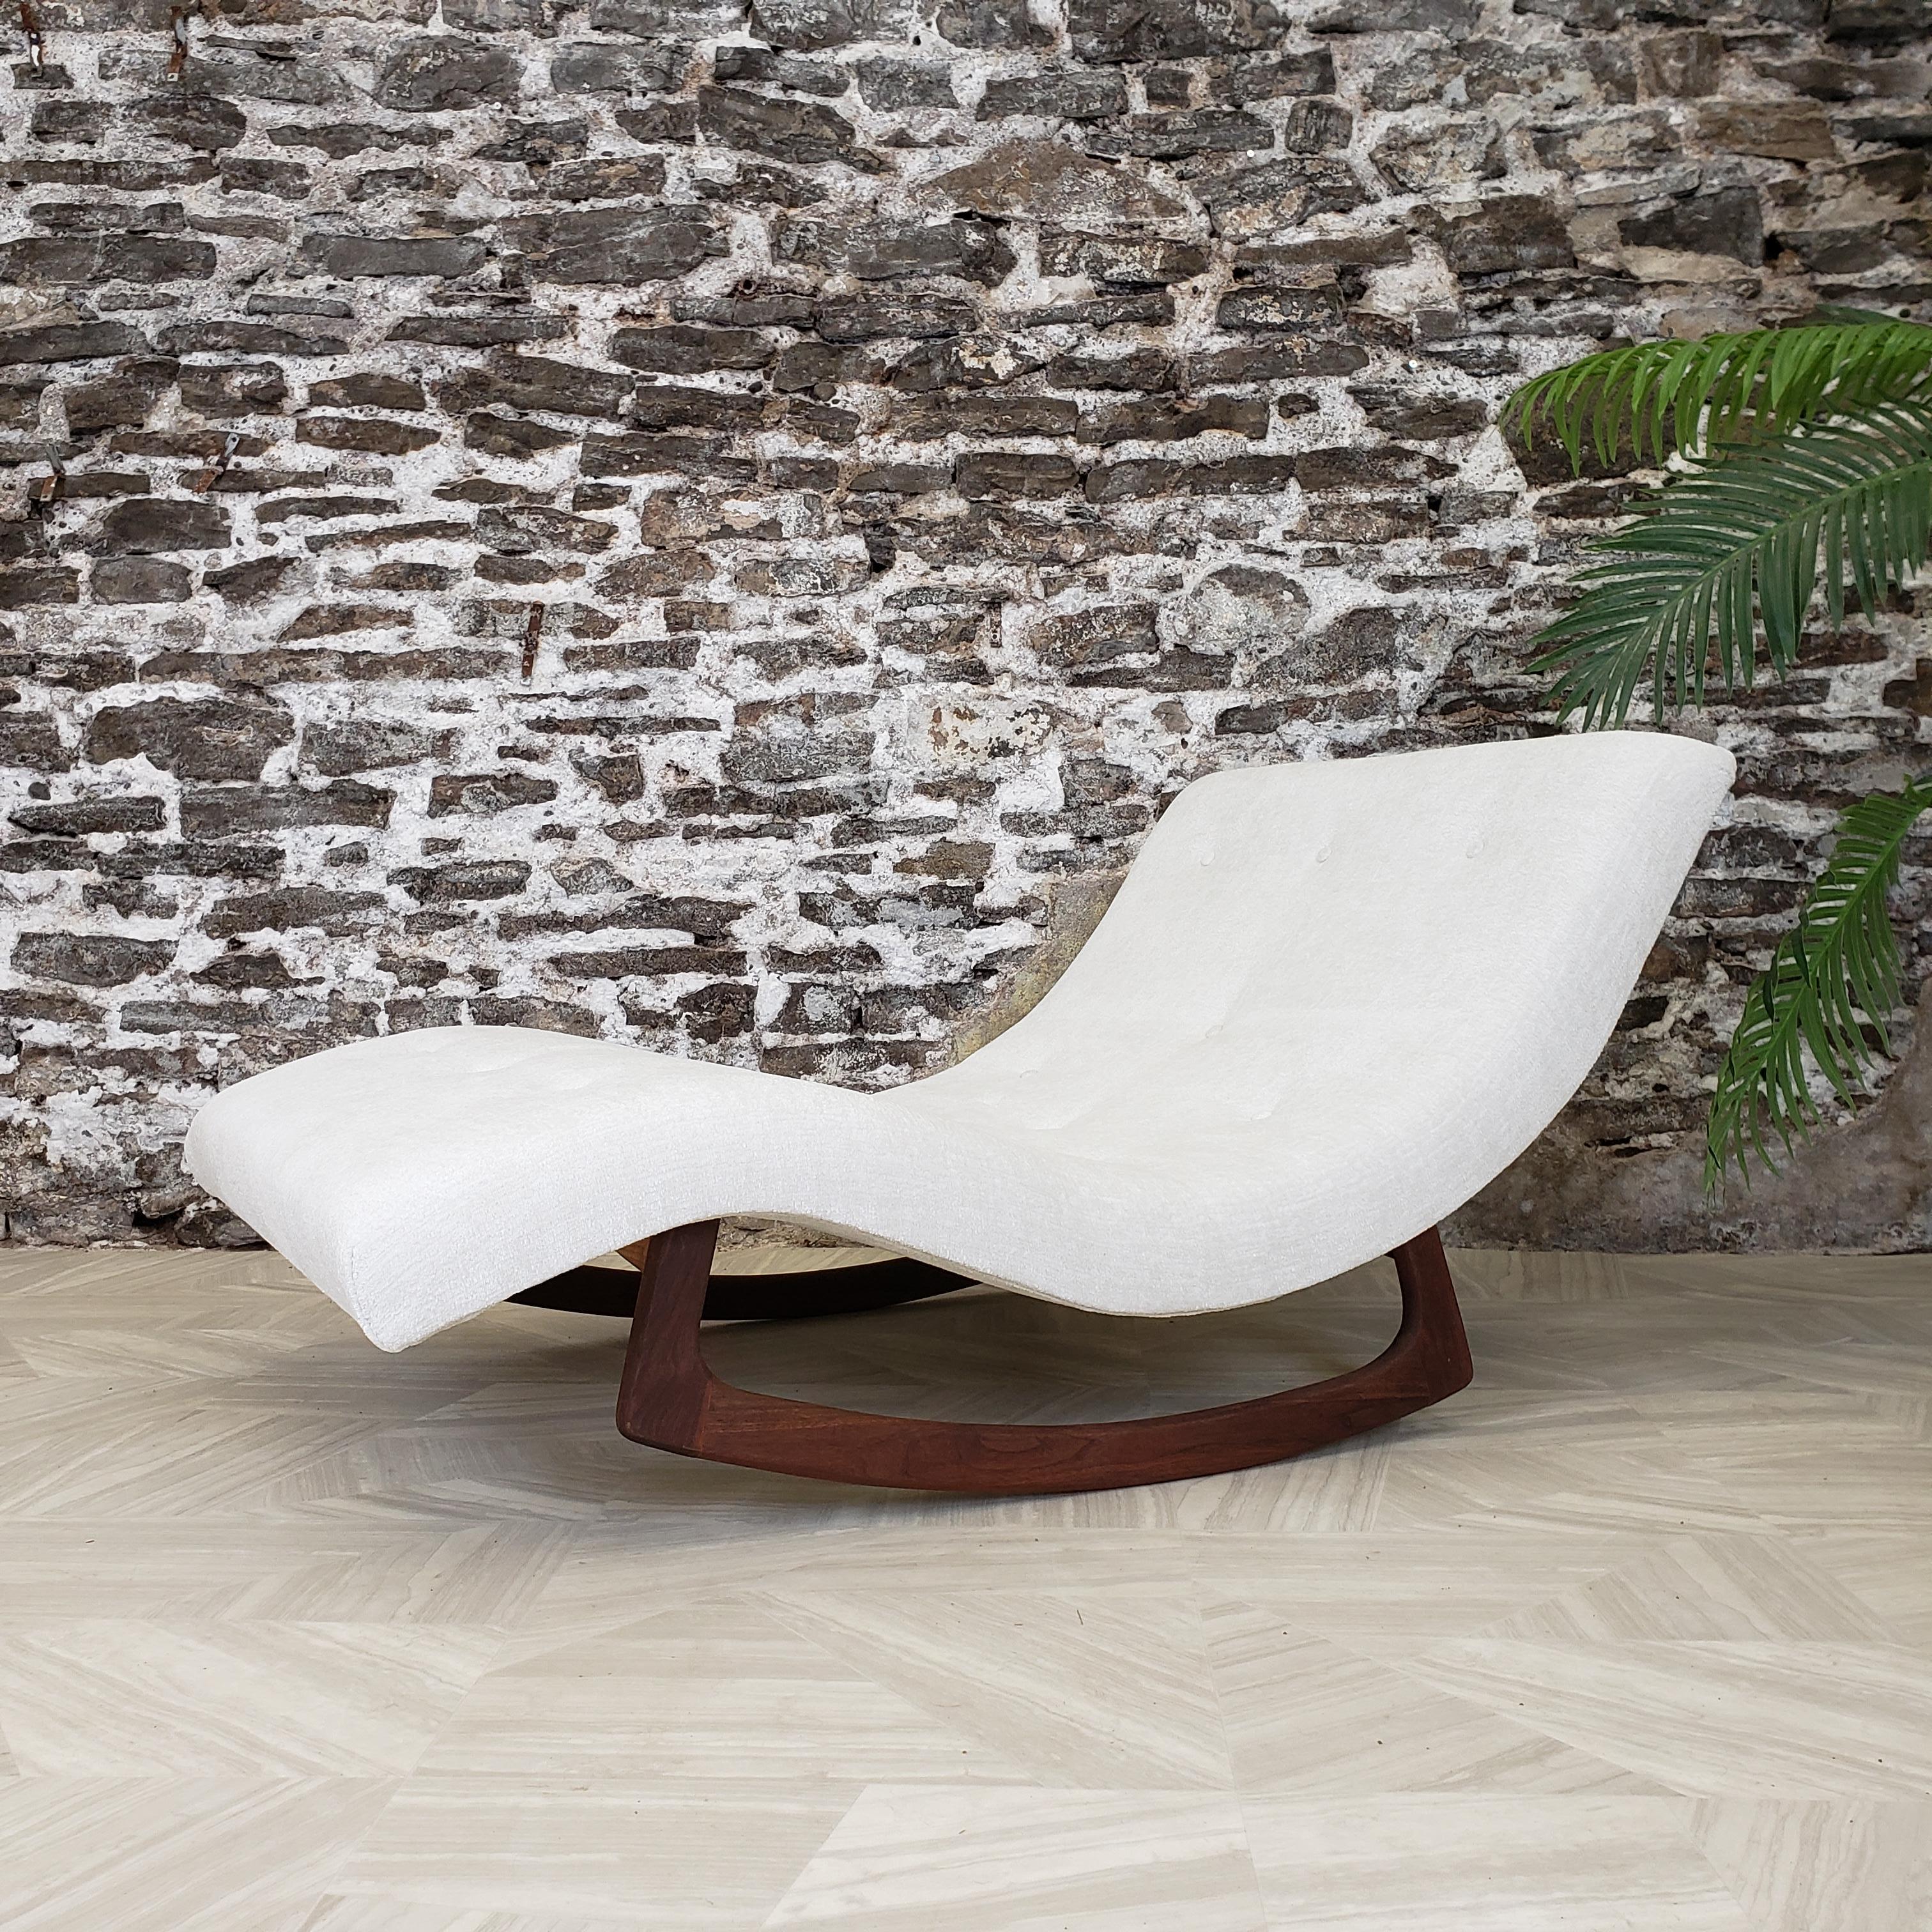 This stylish Adrian Pearsall chaise/rocking lounge chair features a spacious sculpted wave like seat with newly upholstered fabric and completely refinished walnut rockers. This iconic mid-century piece makes an impressive and comfortable addition